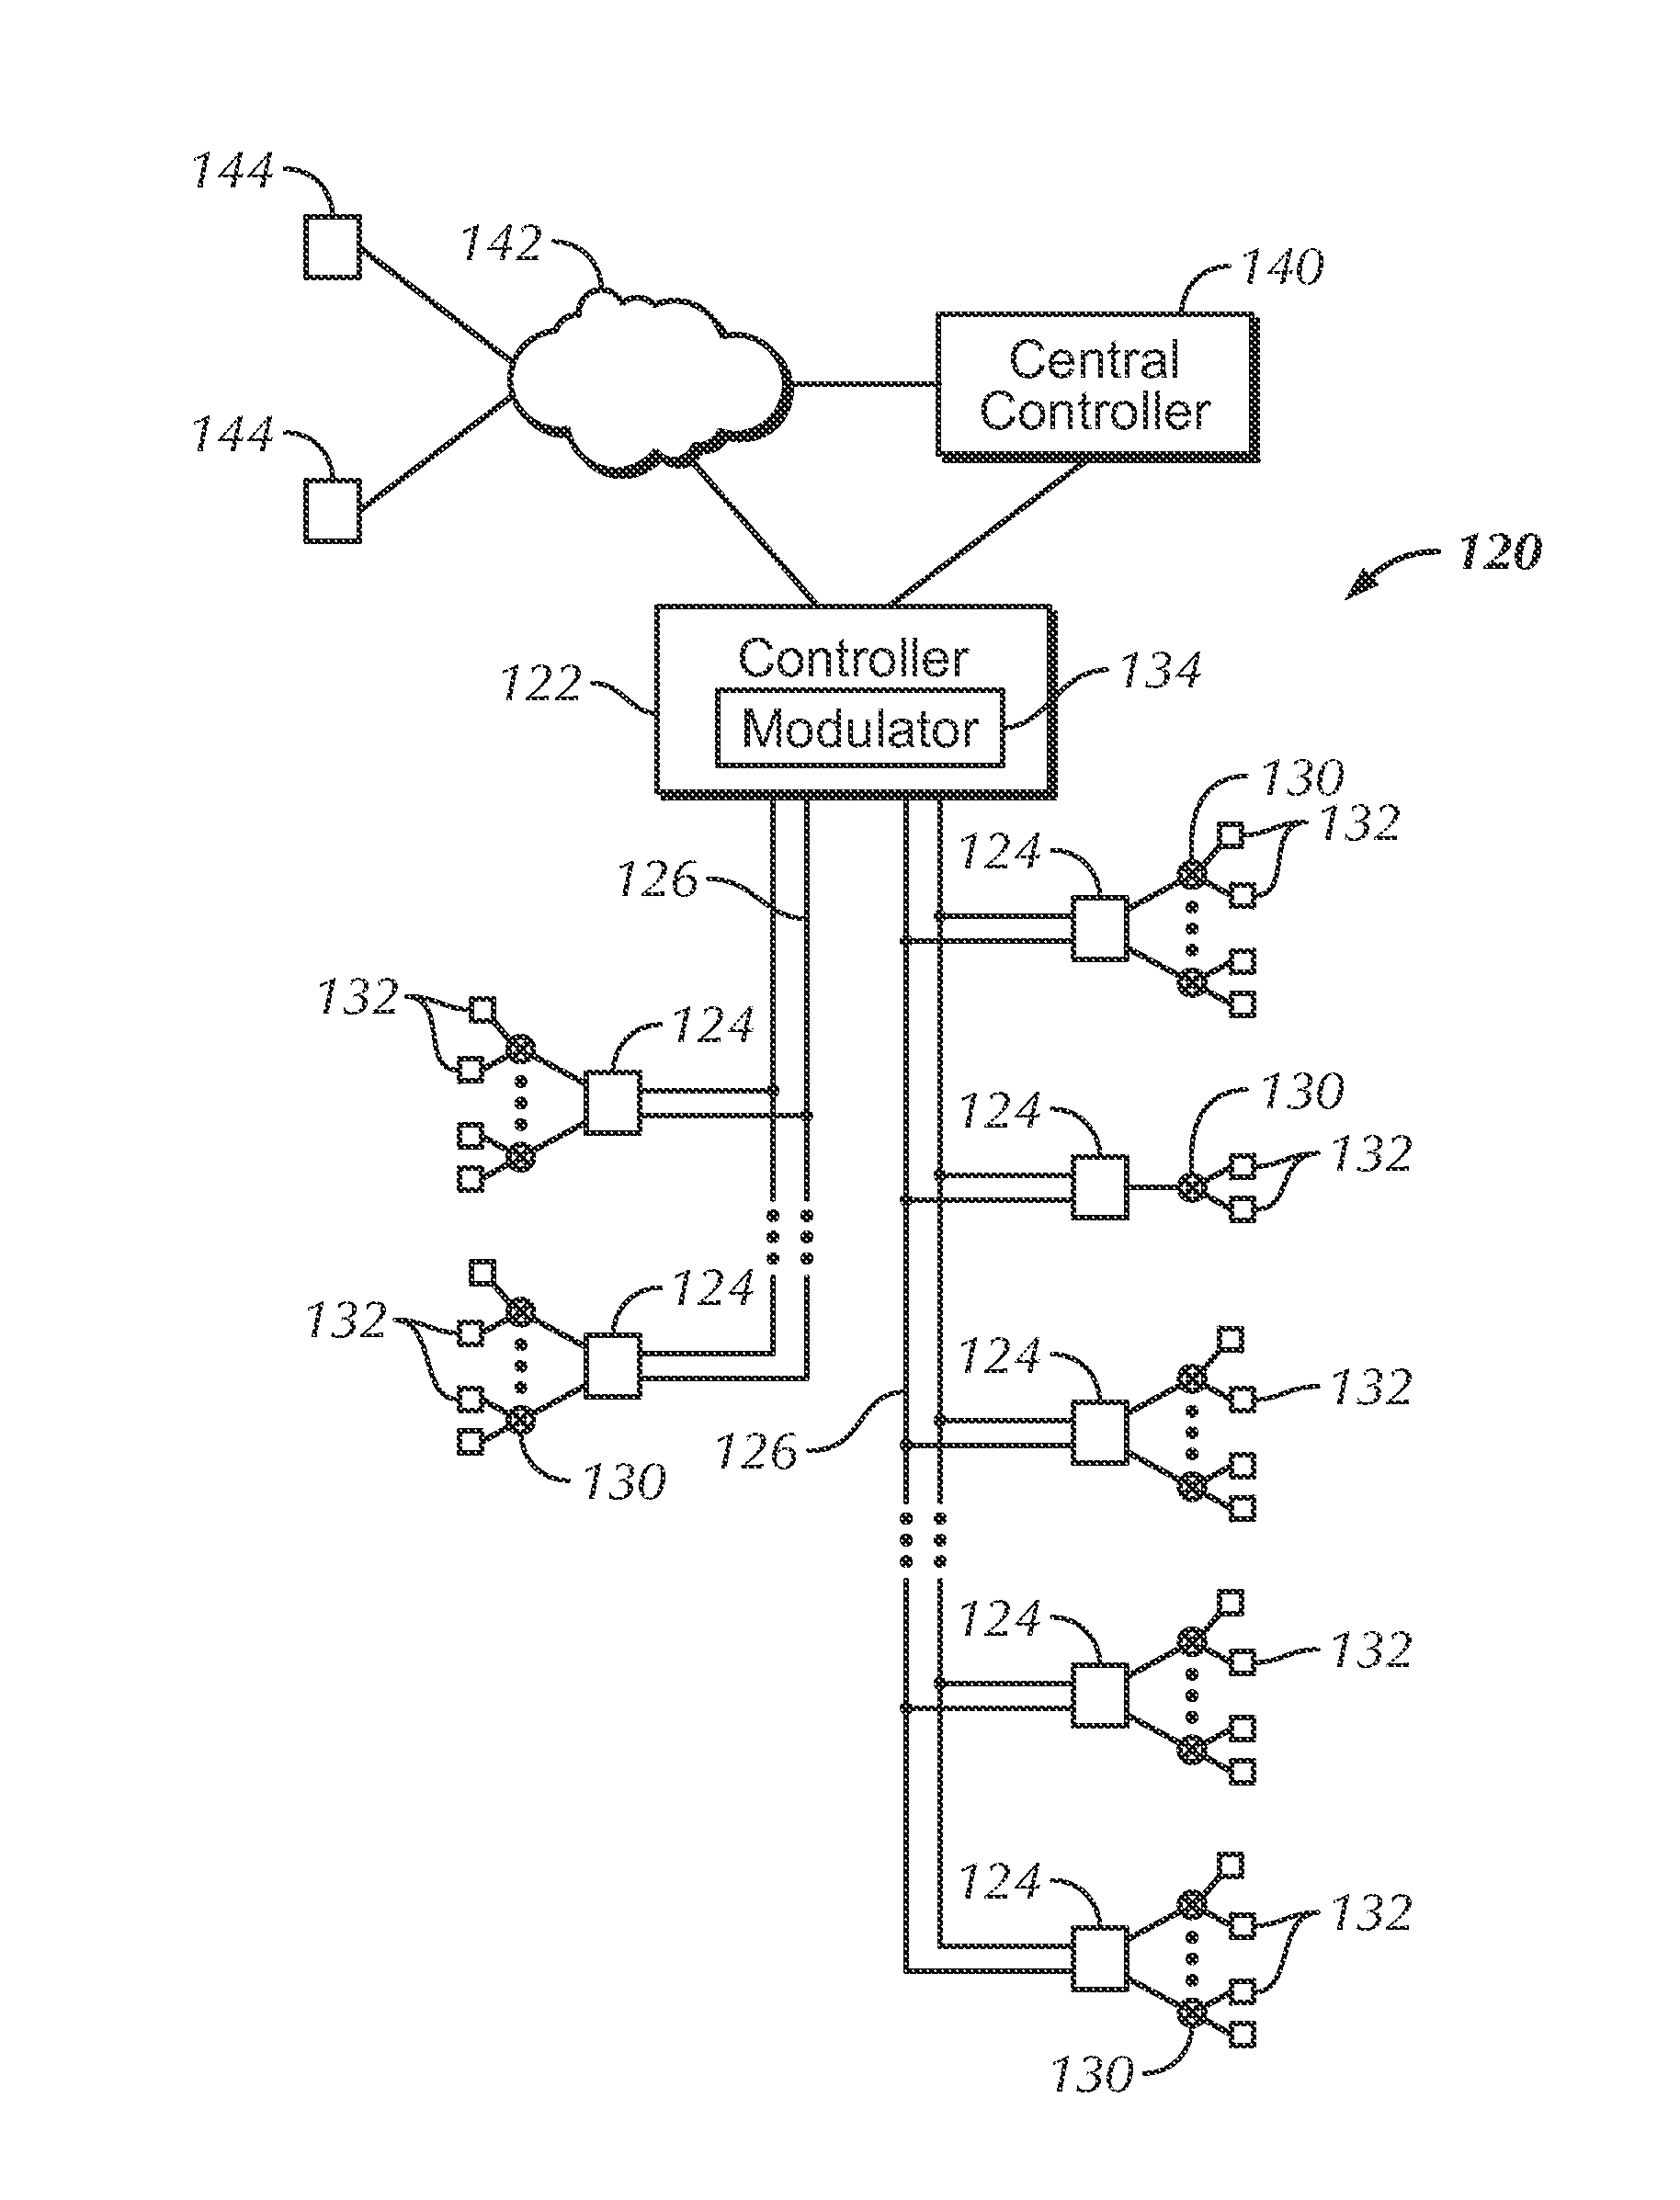 Variable initialization time in the charging of energy reserves in an irrigation control system